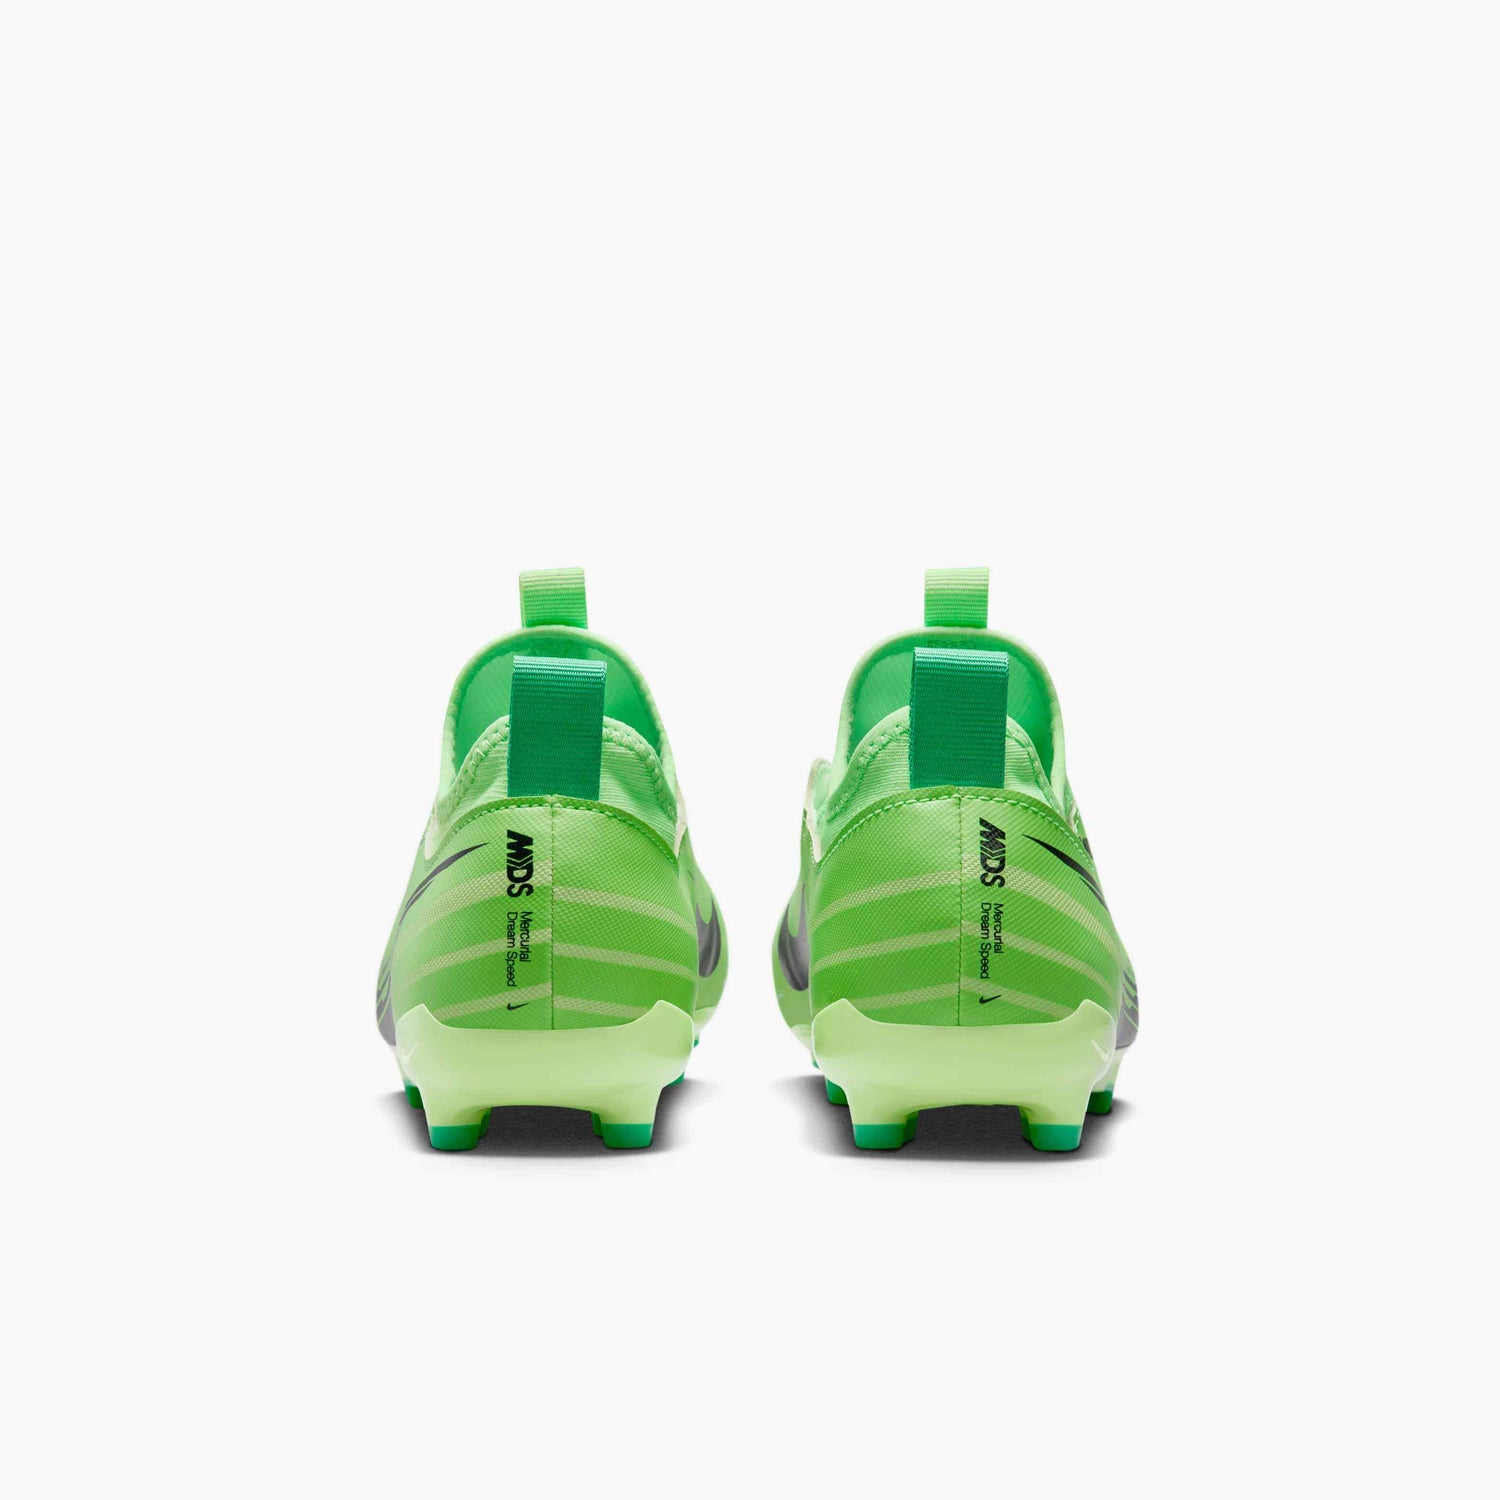 Nike JR Zoom Vapor 15 Academy MDS FGMG - MDS 008 (SP24) (Pair - Back)